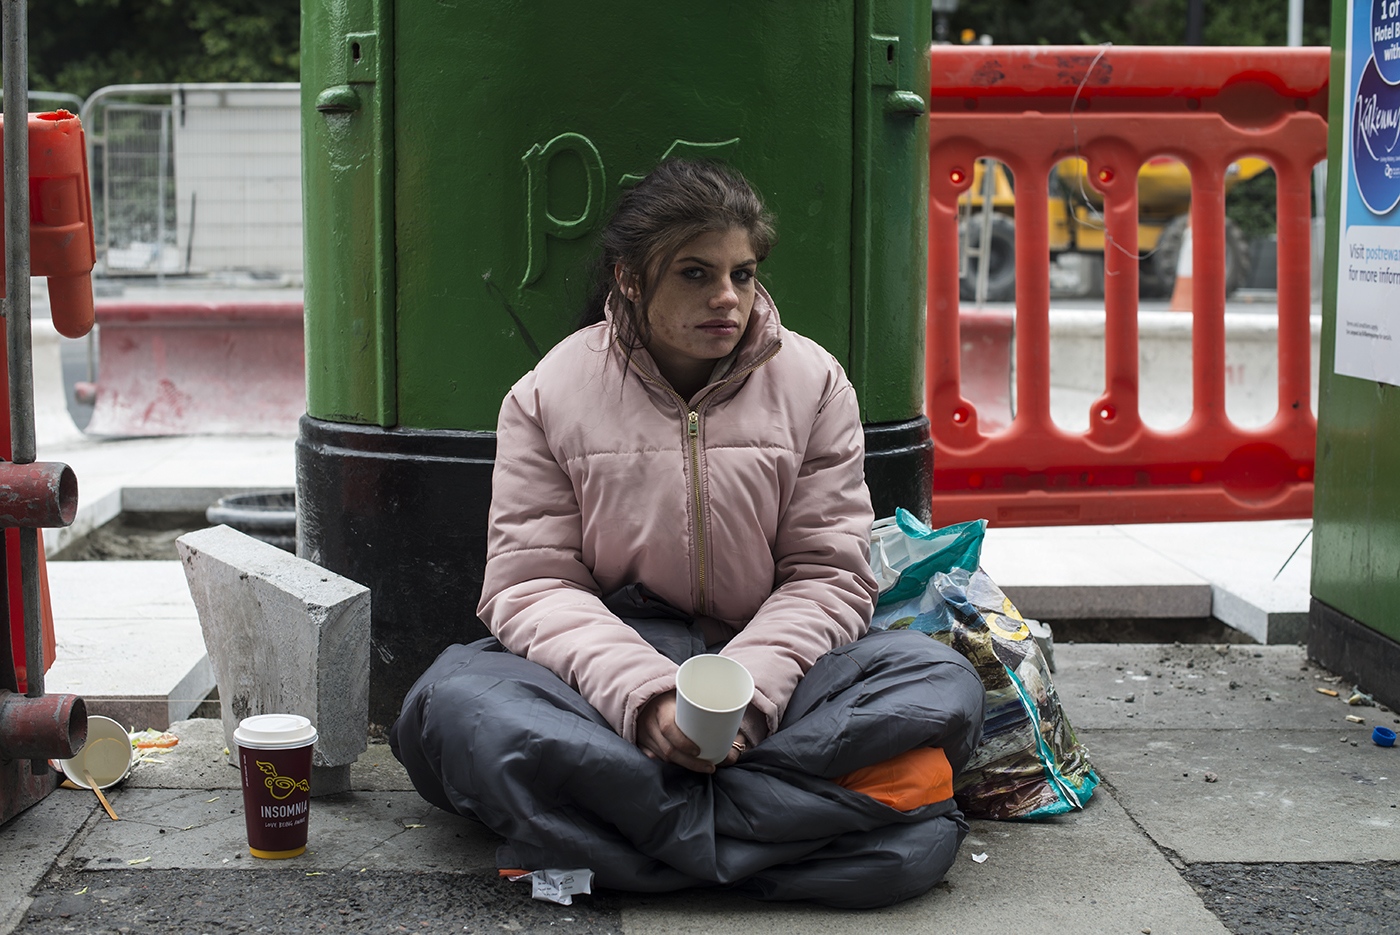 Homes - Kelly, 18 years old, has been living on the street since...